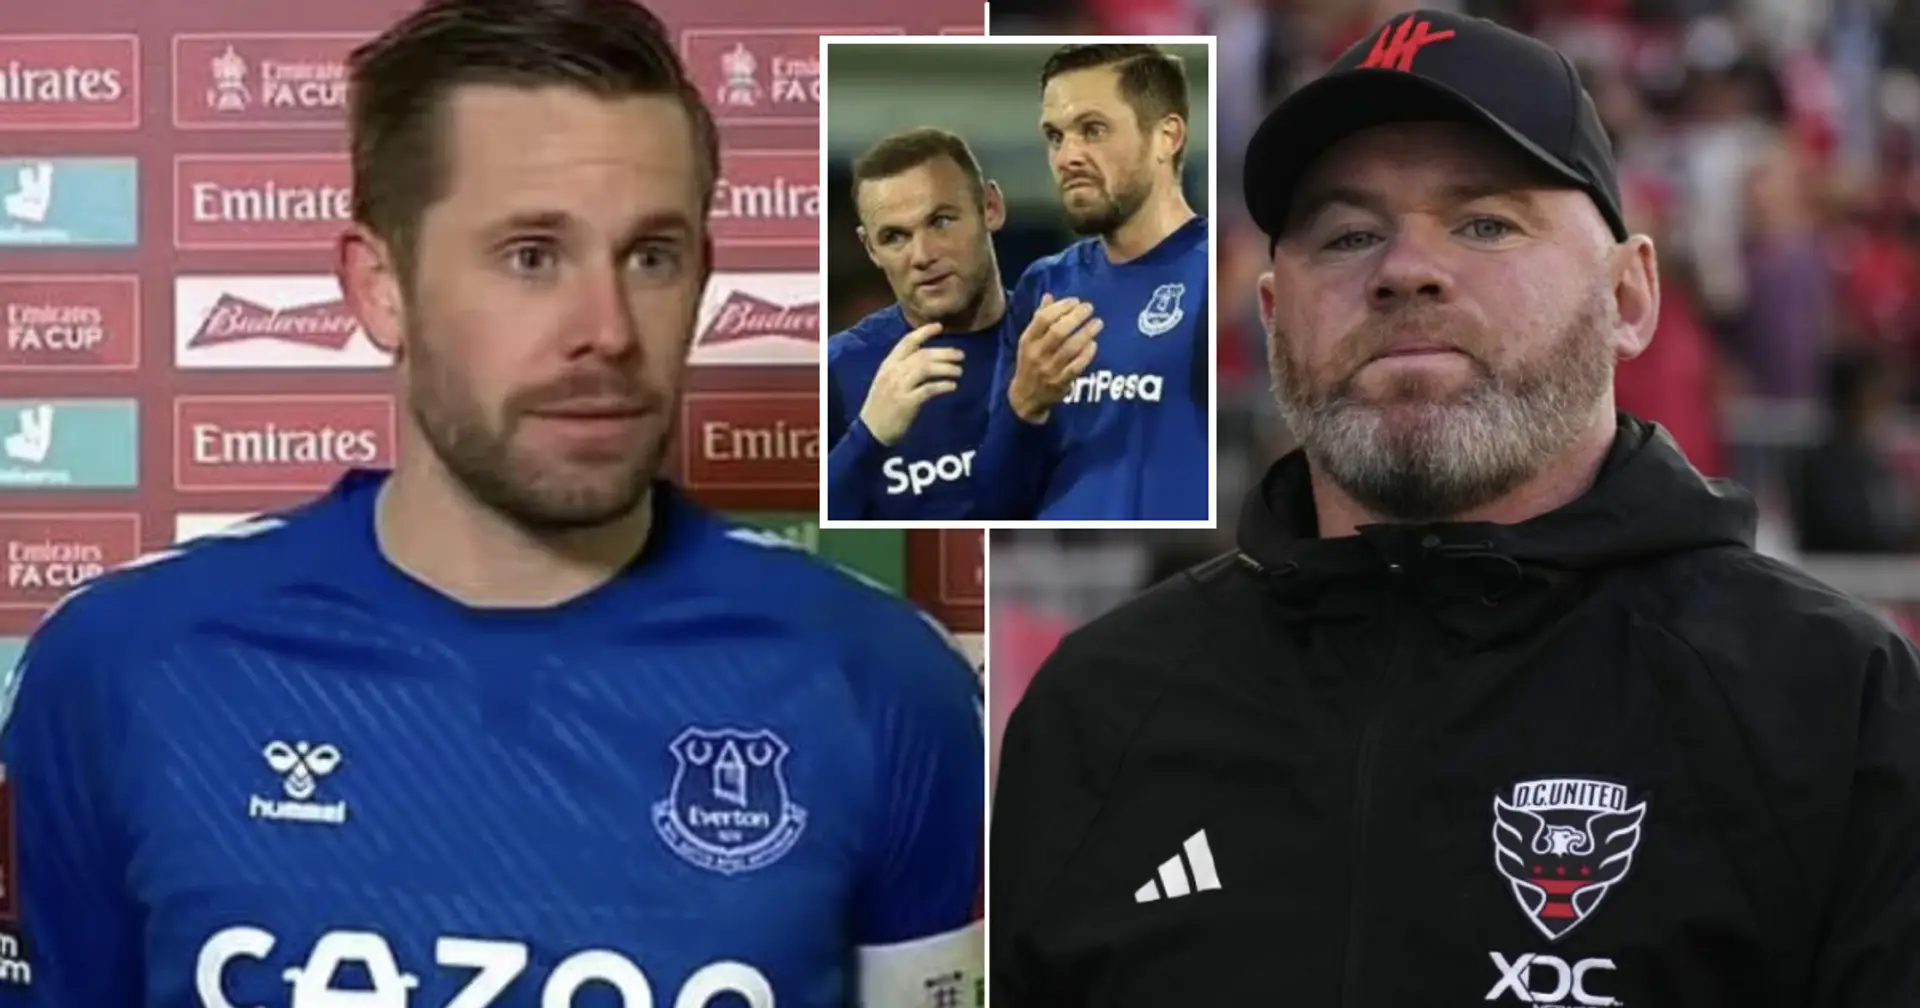 Gylfi Sigurdsson in talks with Wayne Rooney's MLS club - he last played in 2021 before alleged child sex offences